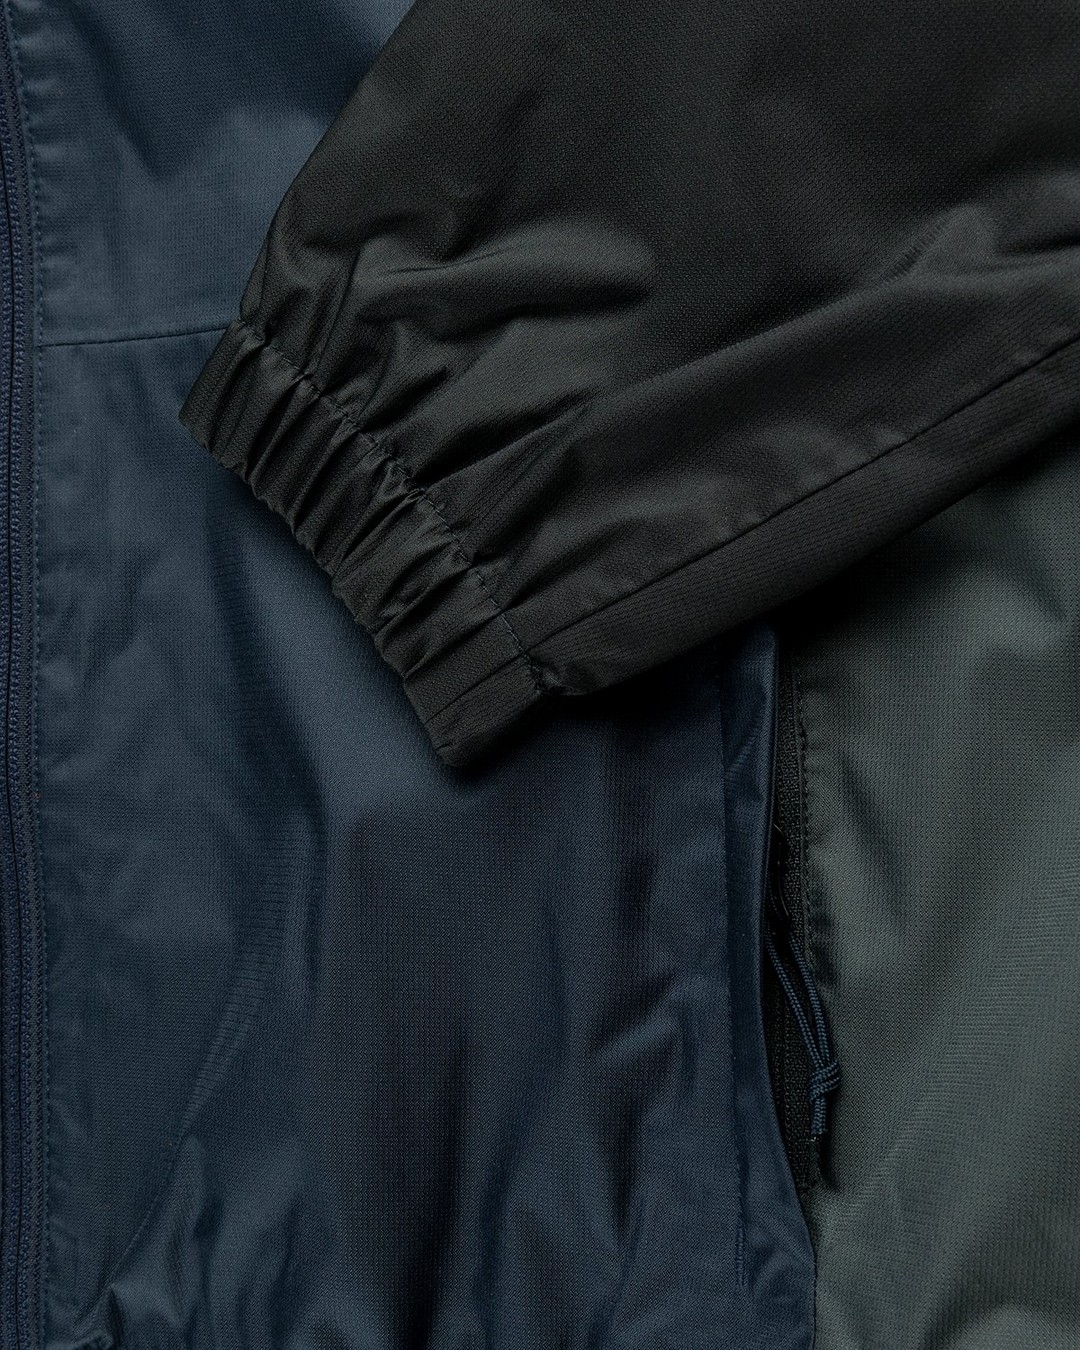 The North Face – Farside Jacket Aviator Navy - Outerwear - Blue - Image 3